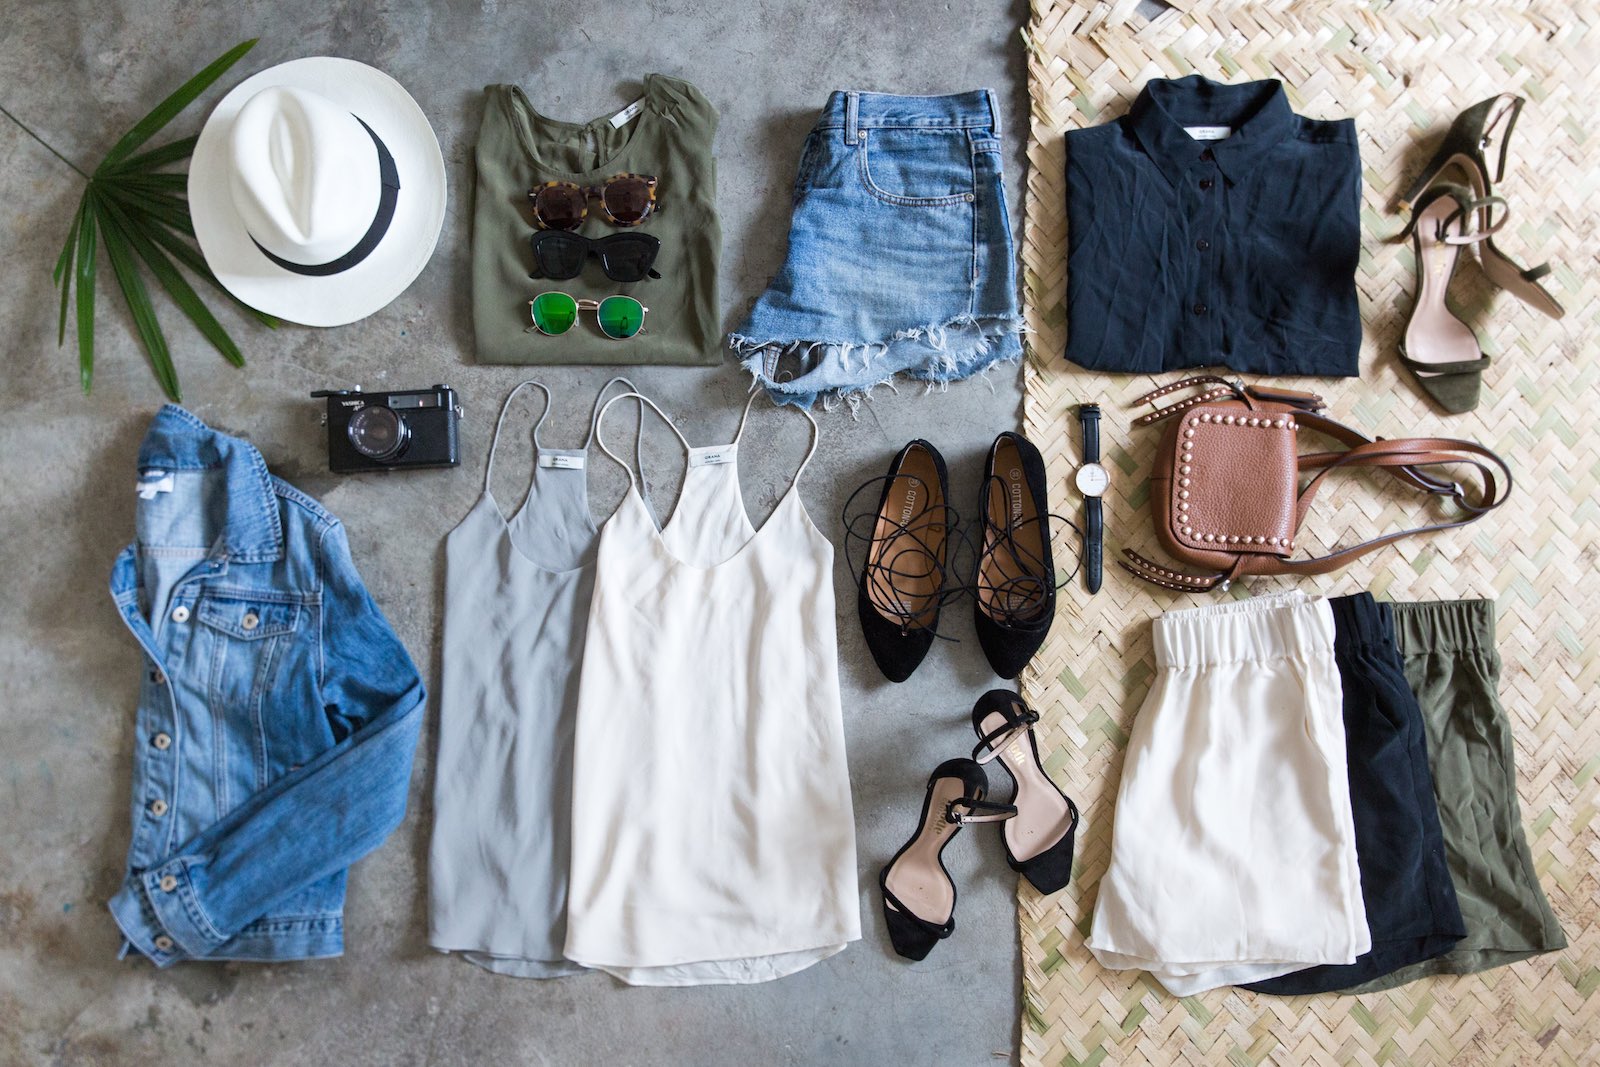 How To Pack Light: Carry-On Packing List for Women